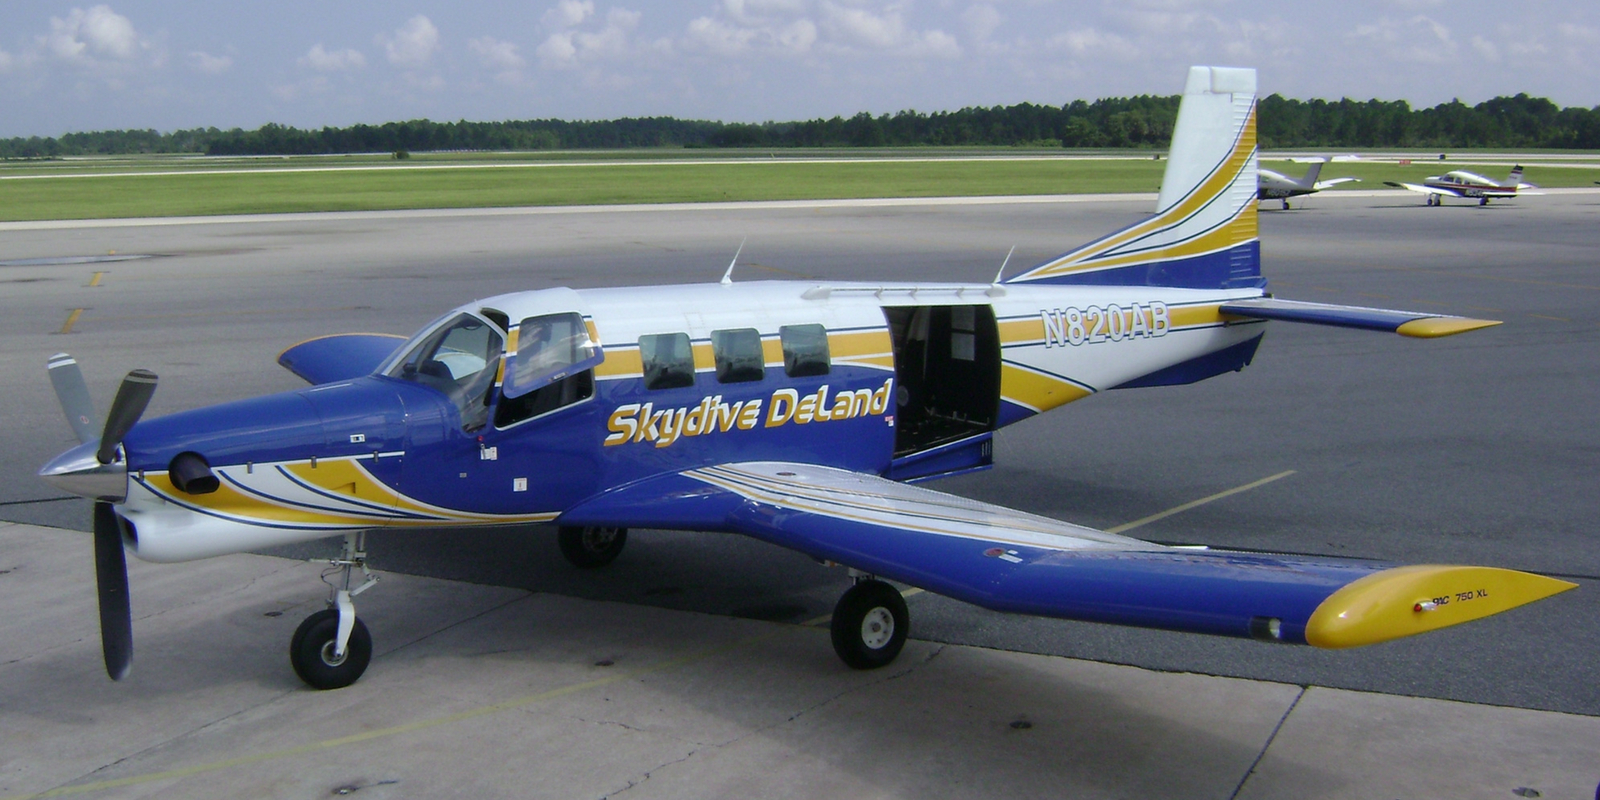 side view of Skydive DeLand's PAC750XL aircraft